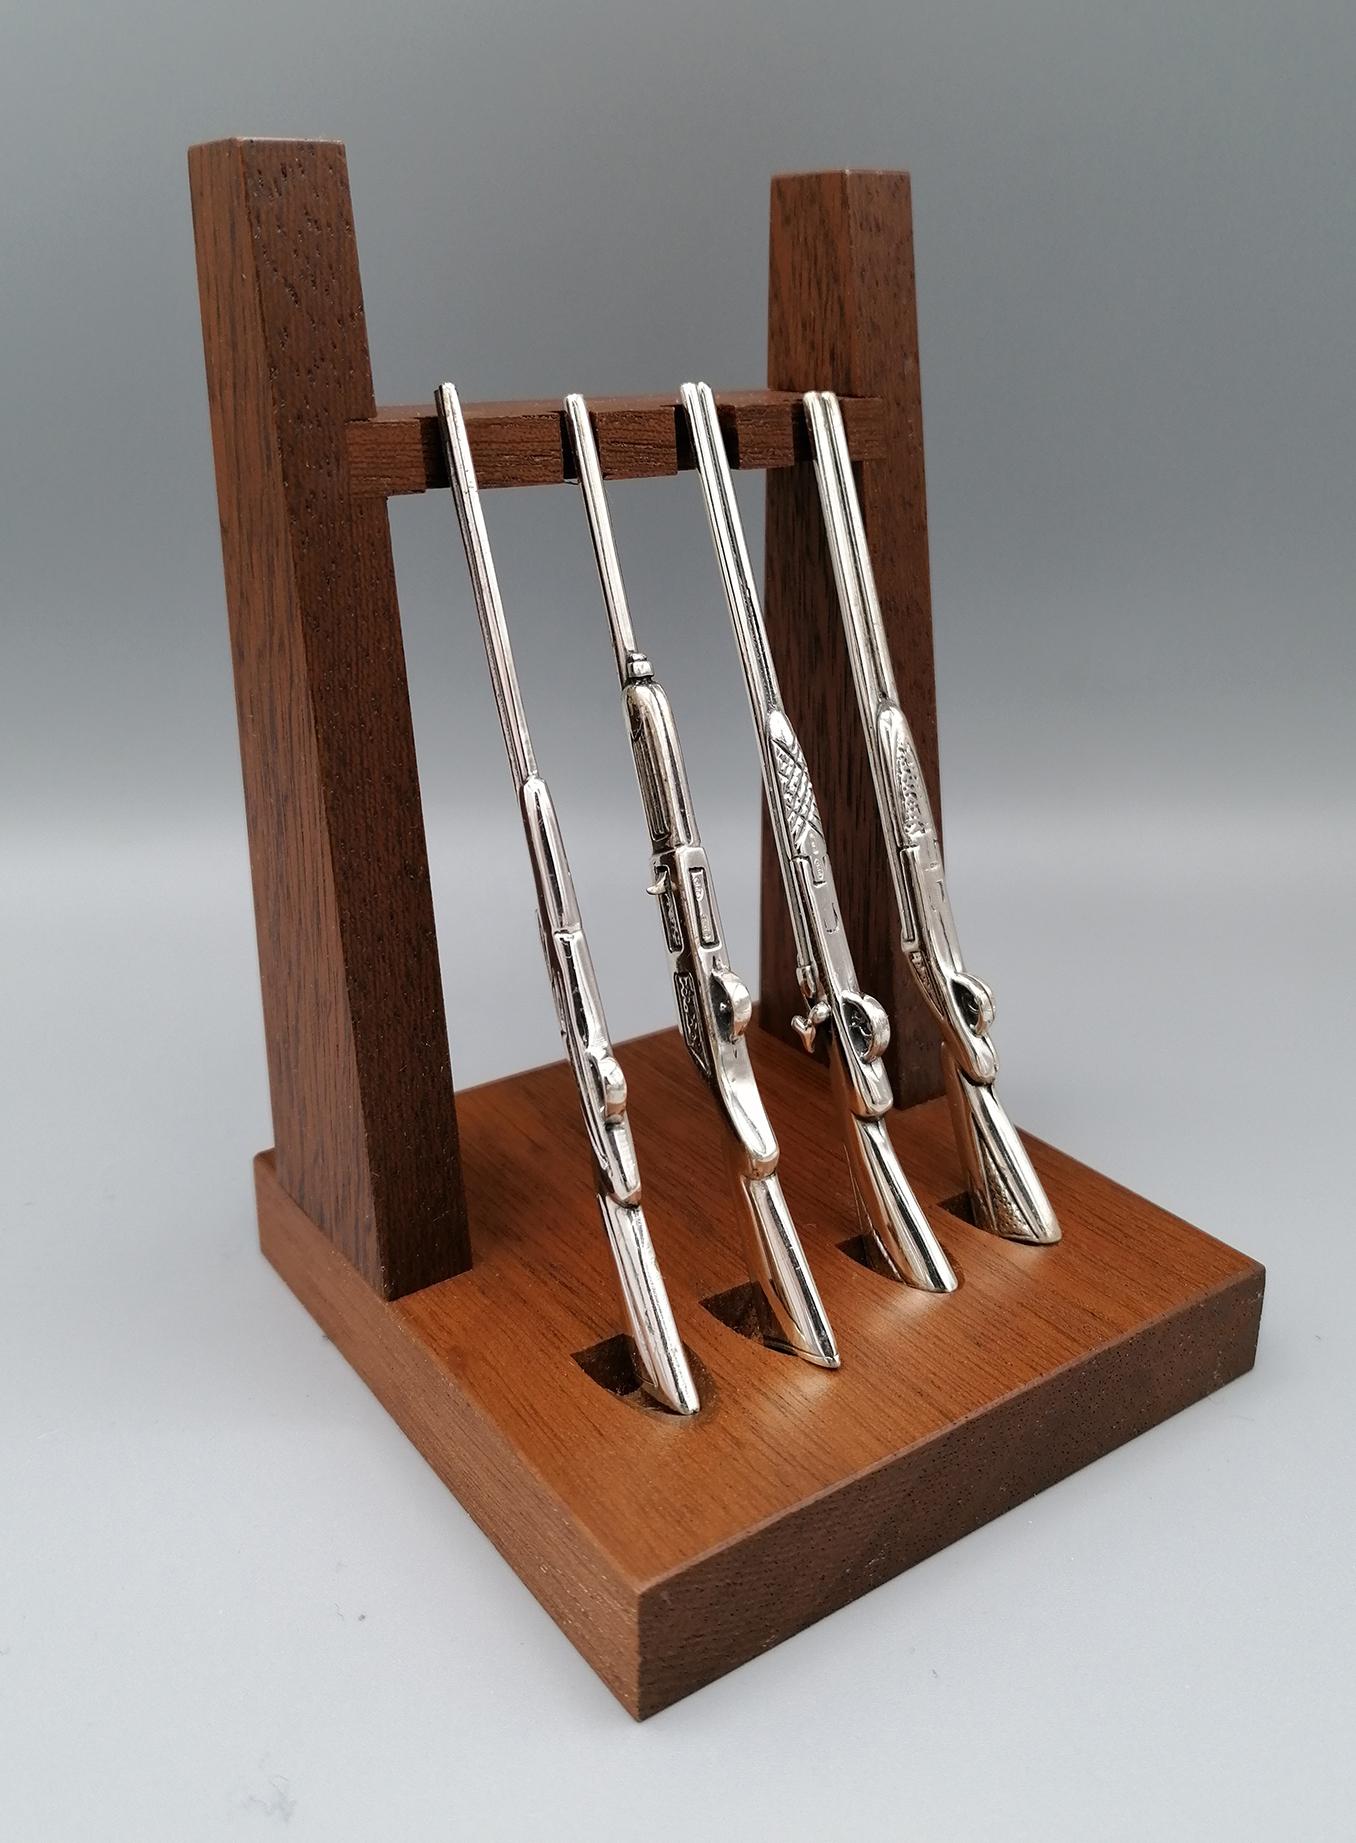 Miniature wooden rack with 4 hunting rifles in 925 sterling silver.
The rifles for hunting, in four different models, are in solid sterling silver casting and finished by hand.
Italian silverware, already with a centuries-old tradition, had a great